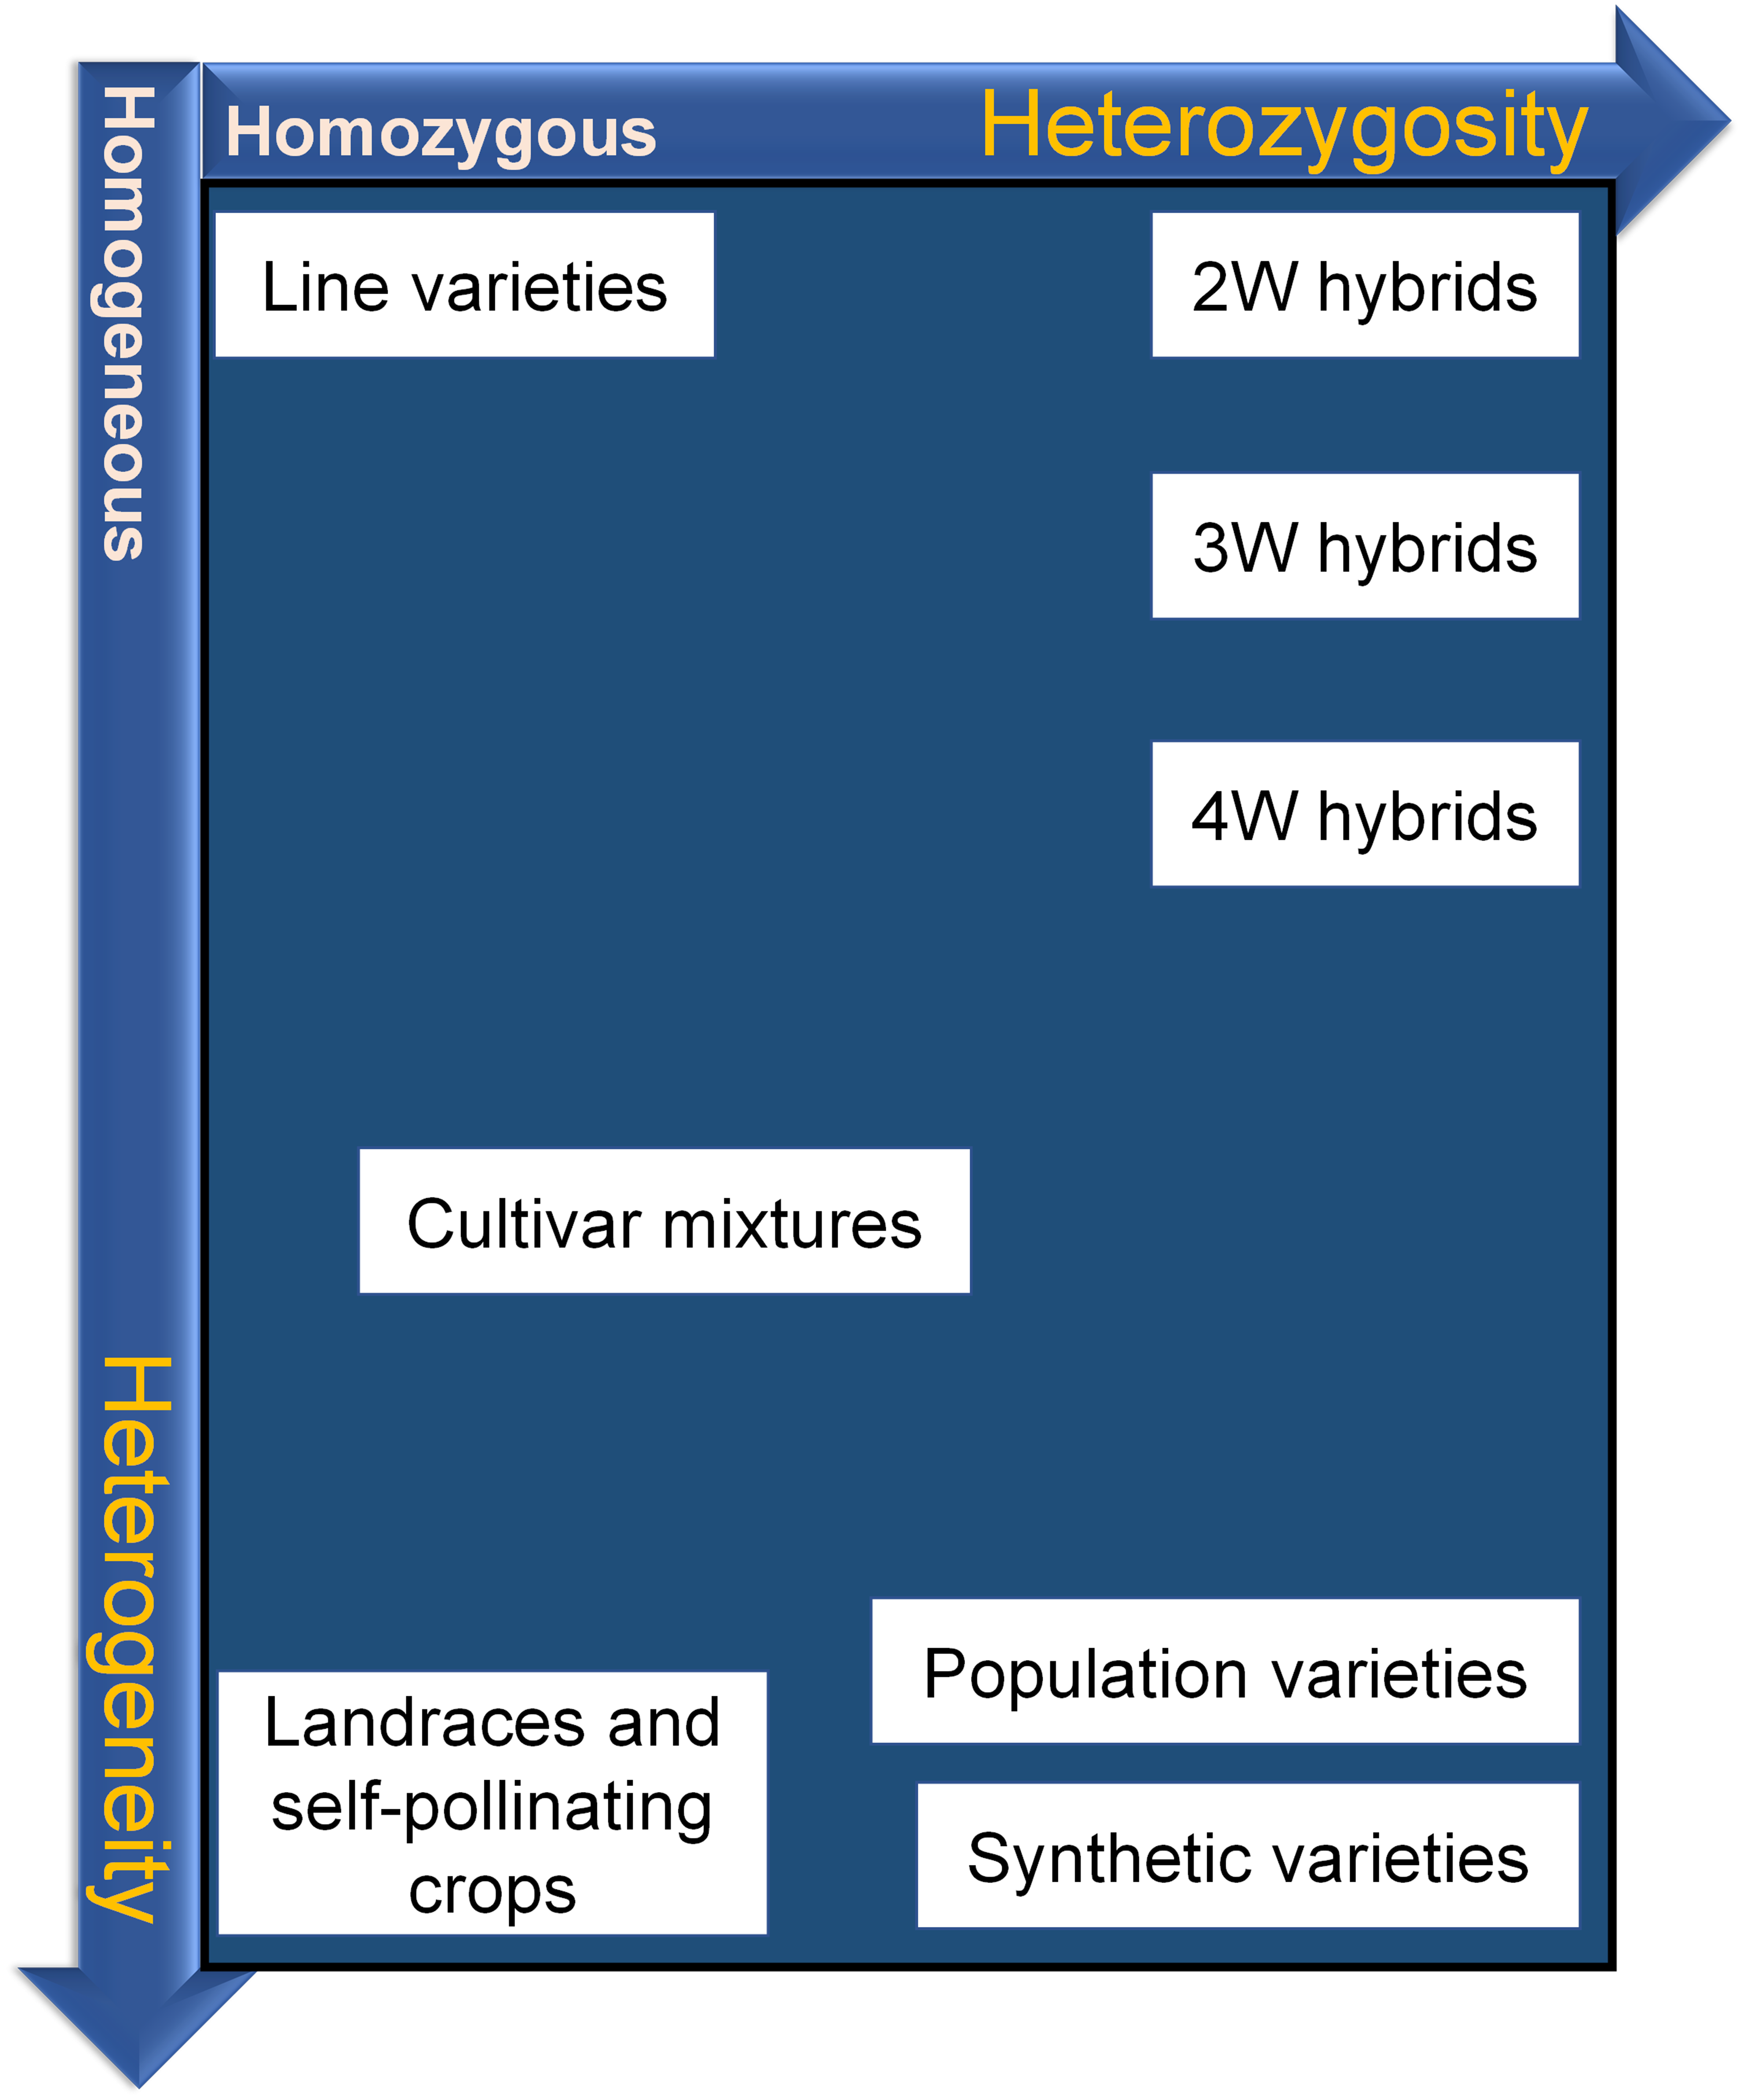 Genetic structures plotted along a chart of heterozygosity and heterogeneity. Landraces and self-pollinating crops have the highest heterogeneity while 2W hybrids have the highest heterozygosity.